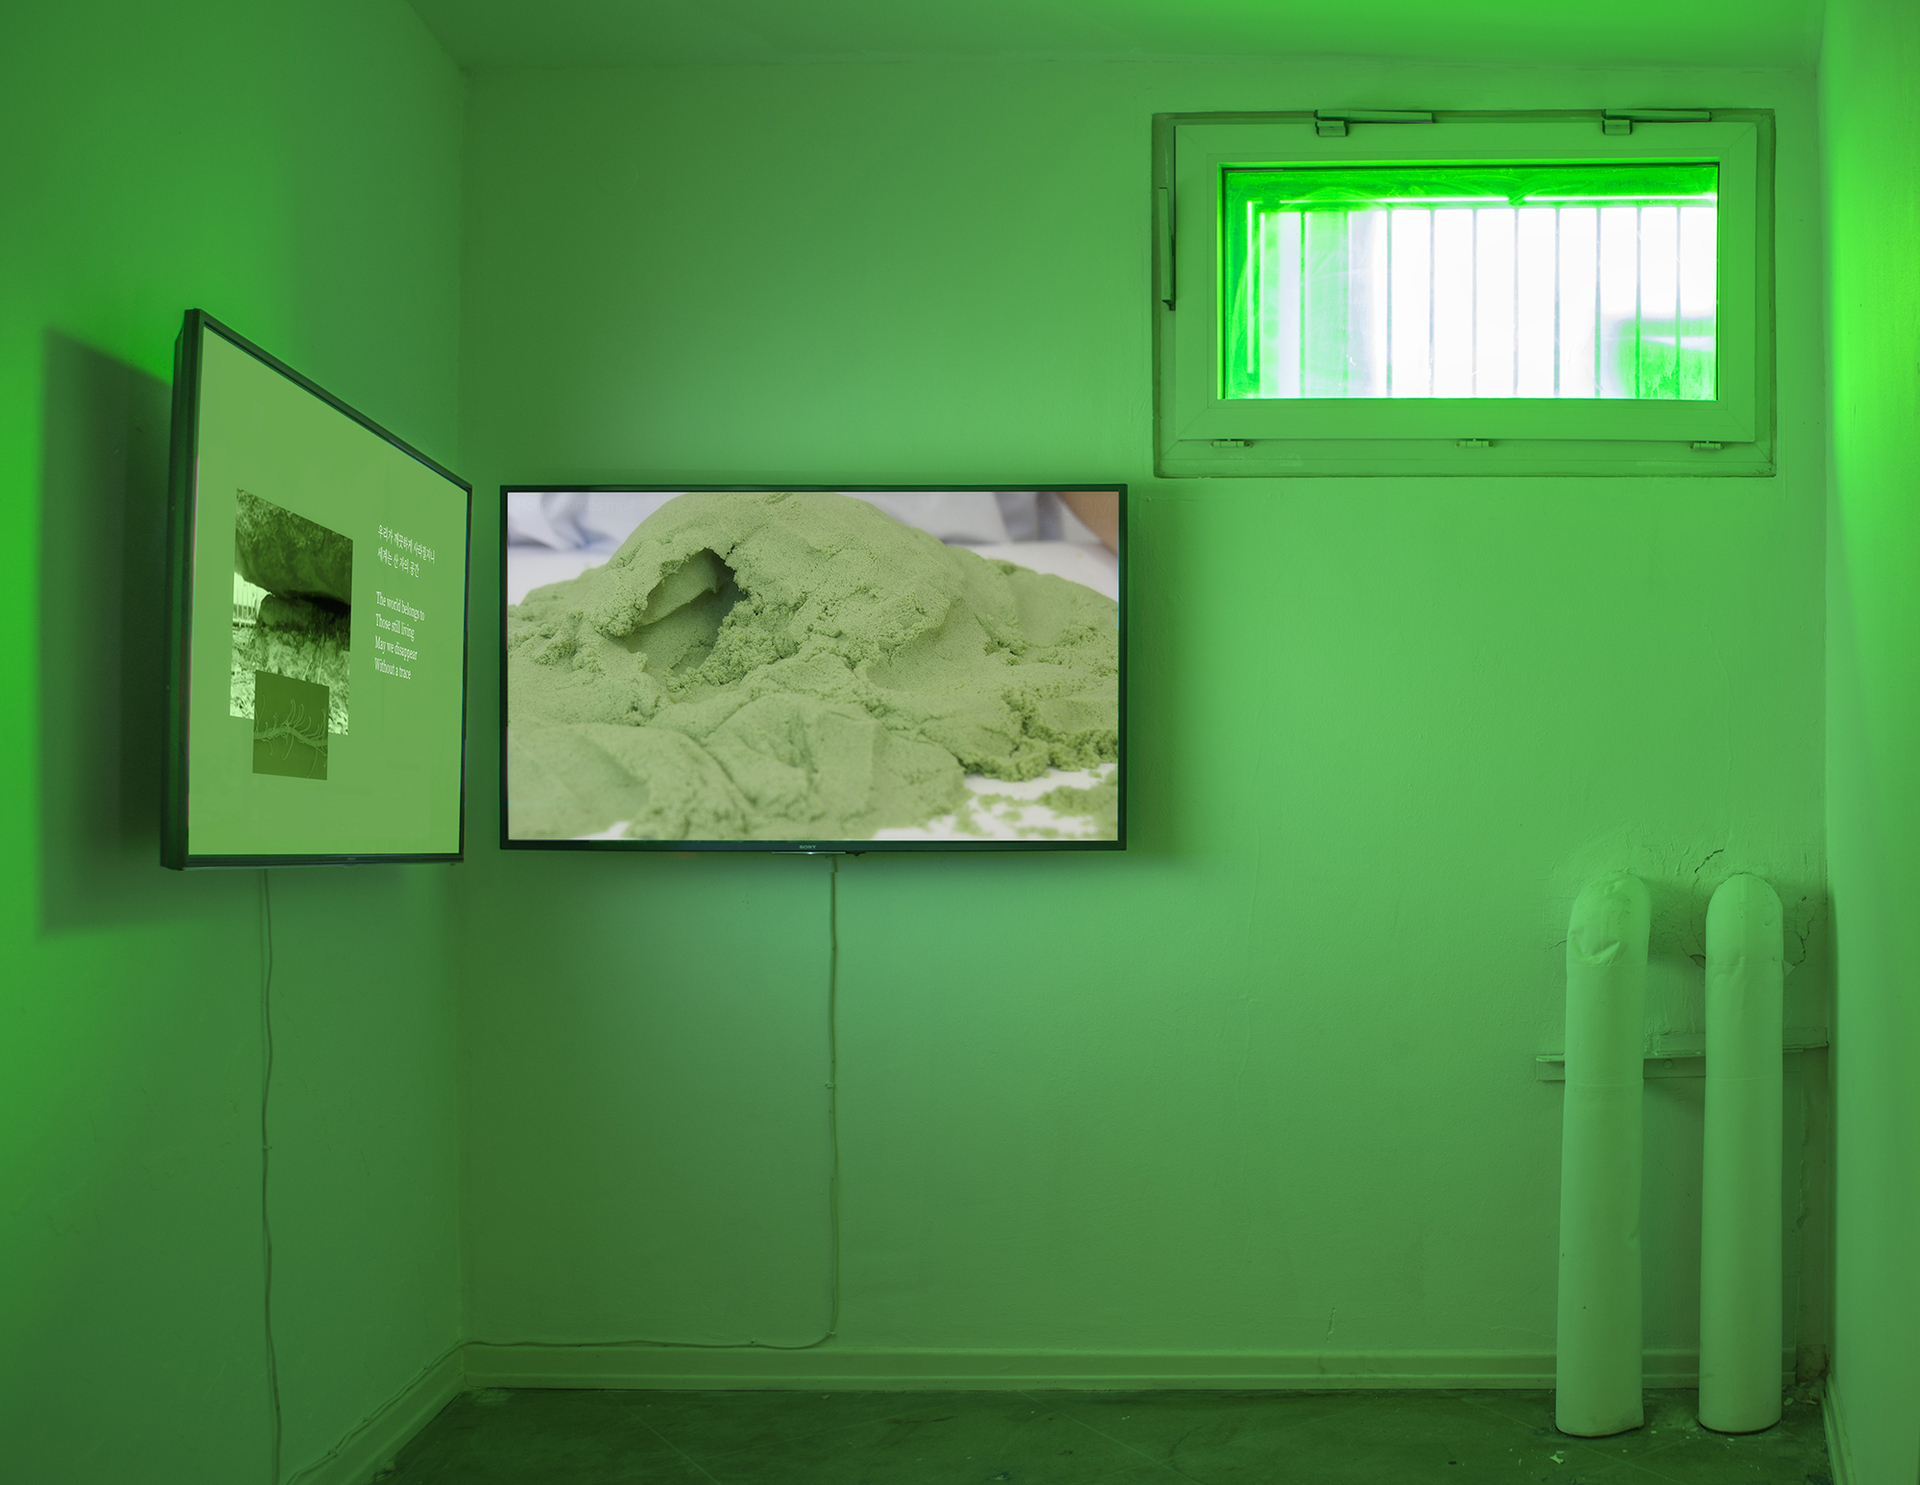 Sylbee Kim (from left to right): Prayers for Emptiness, 2018 Single channel video, 4K transferred to HD, 16:9, color, sound, 4’55” / Hollow Tombs, 2018 Single channel video, 4K transferred to HD, 16:9, color, sound, 9’12”, MÉLANGE 2020.